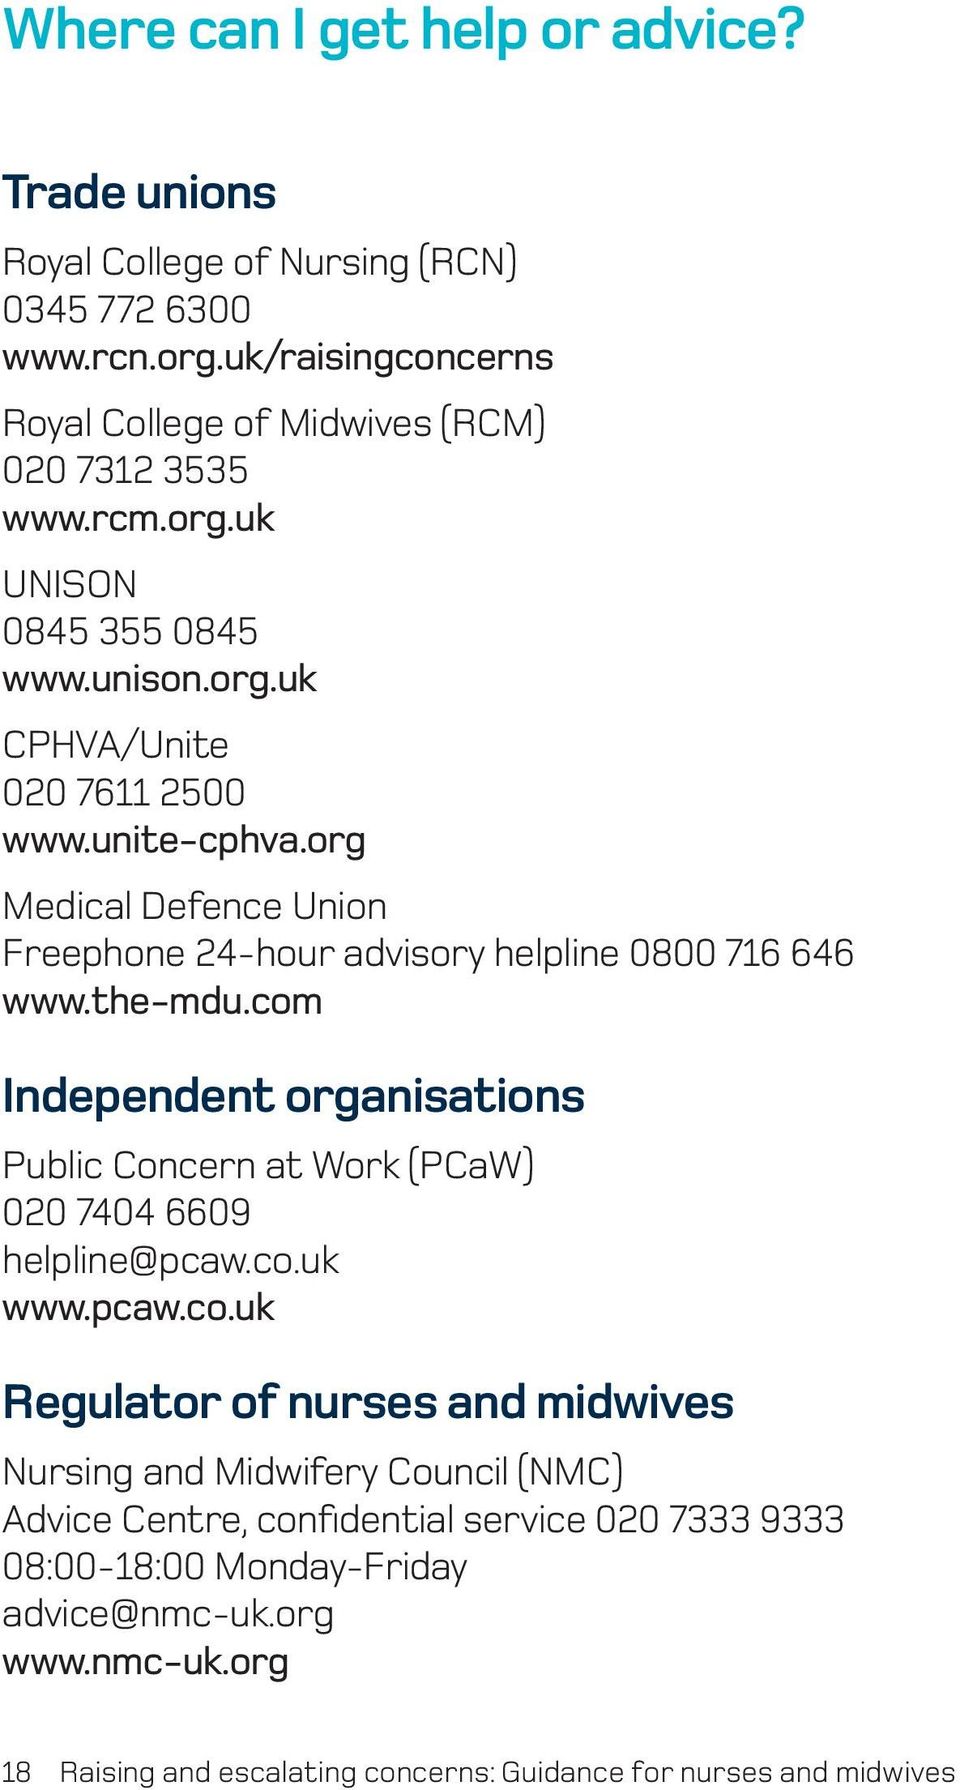 com Independent organisations Public Concern at Work (PCaW) 020 7404 6609 helpline@pcaw.co.uk www.pcaw.co.uk Regulator of nurses and midwives Nursing and Midwifery Council (NMC) Advice Centre, confidential service 020 7333 9333 08:00-18:00 Monday-Friday advice@nmc-uk.